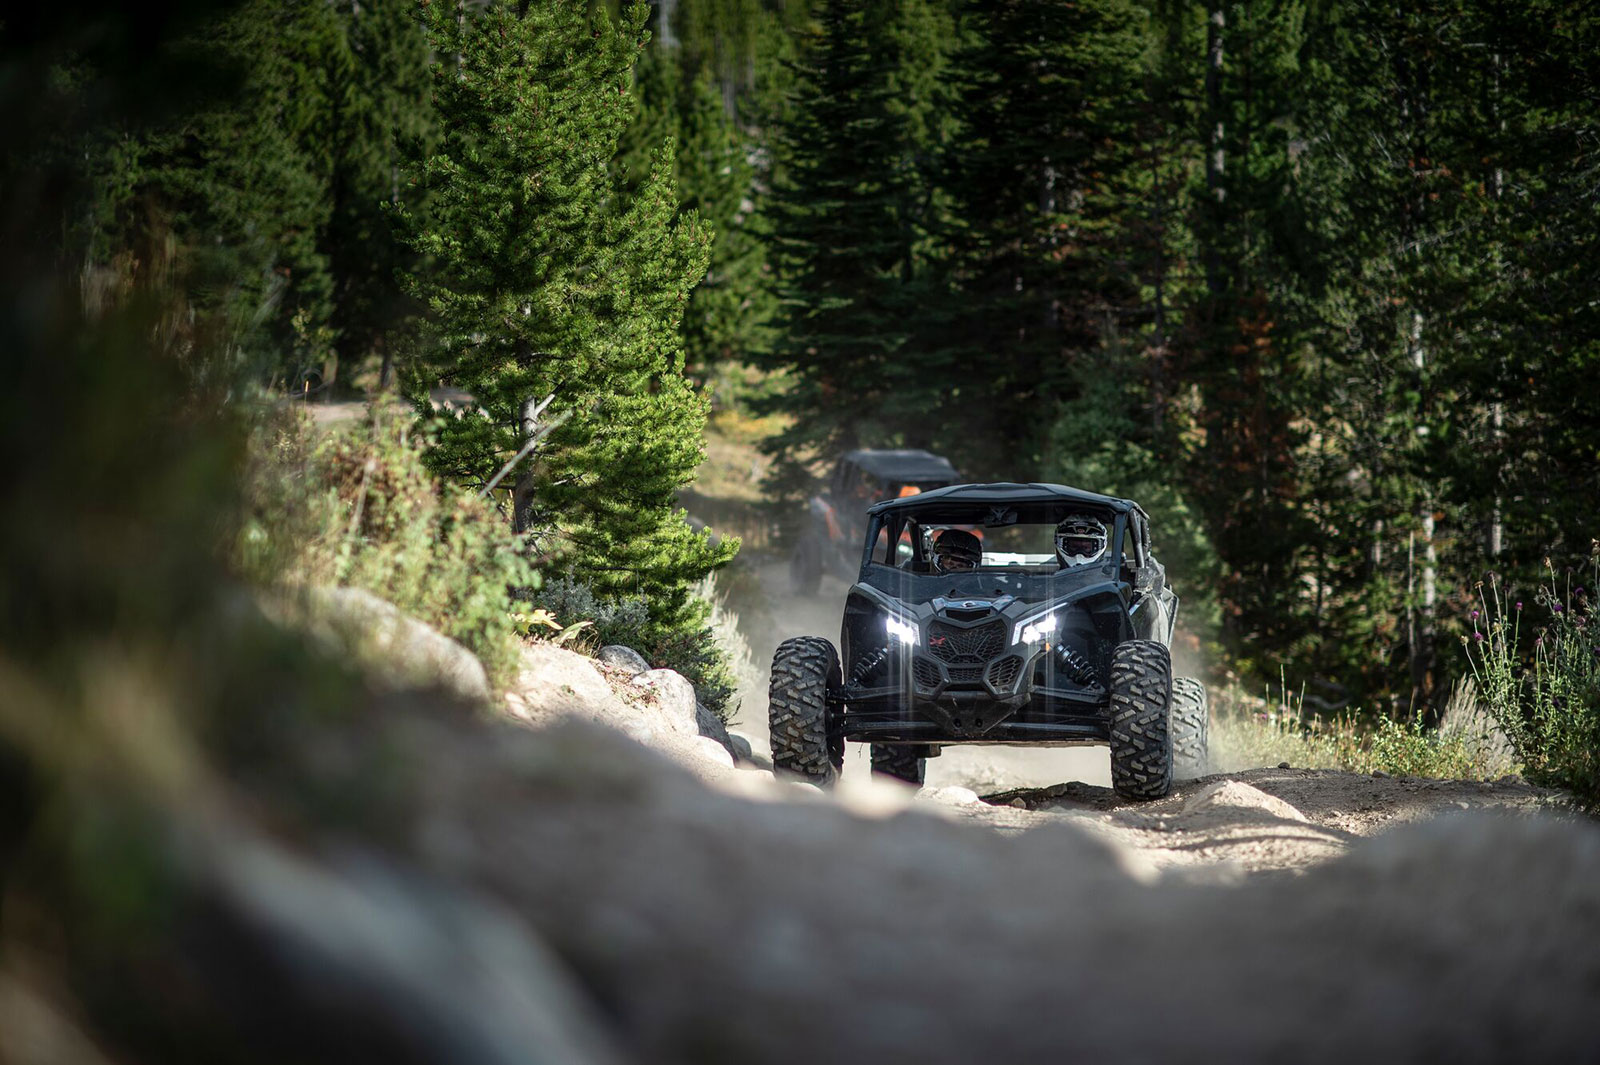 RZR on a technical trail